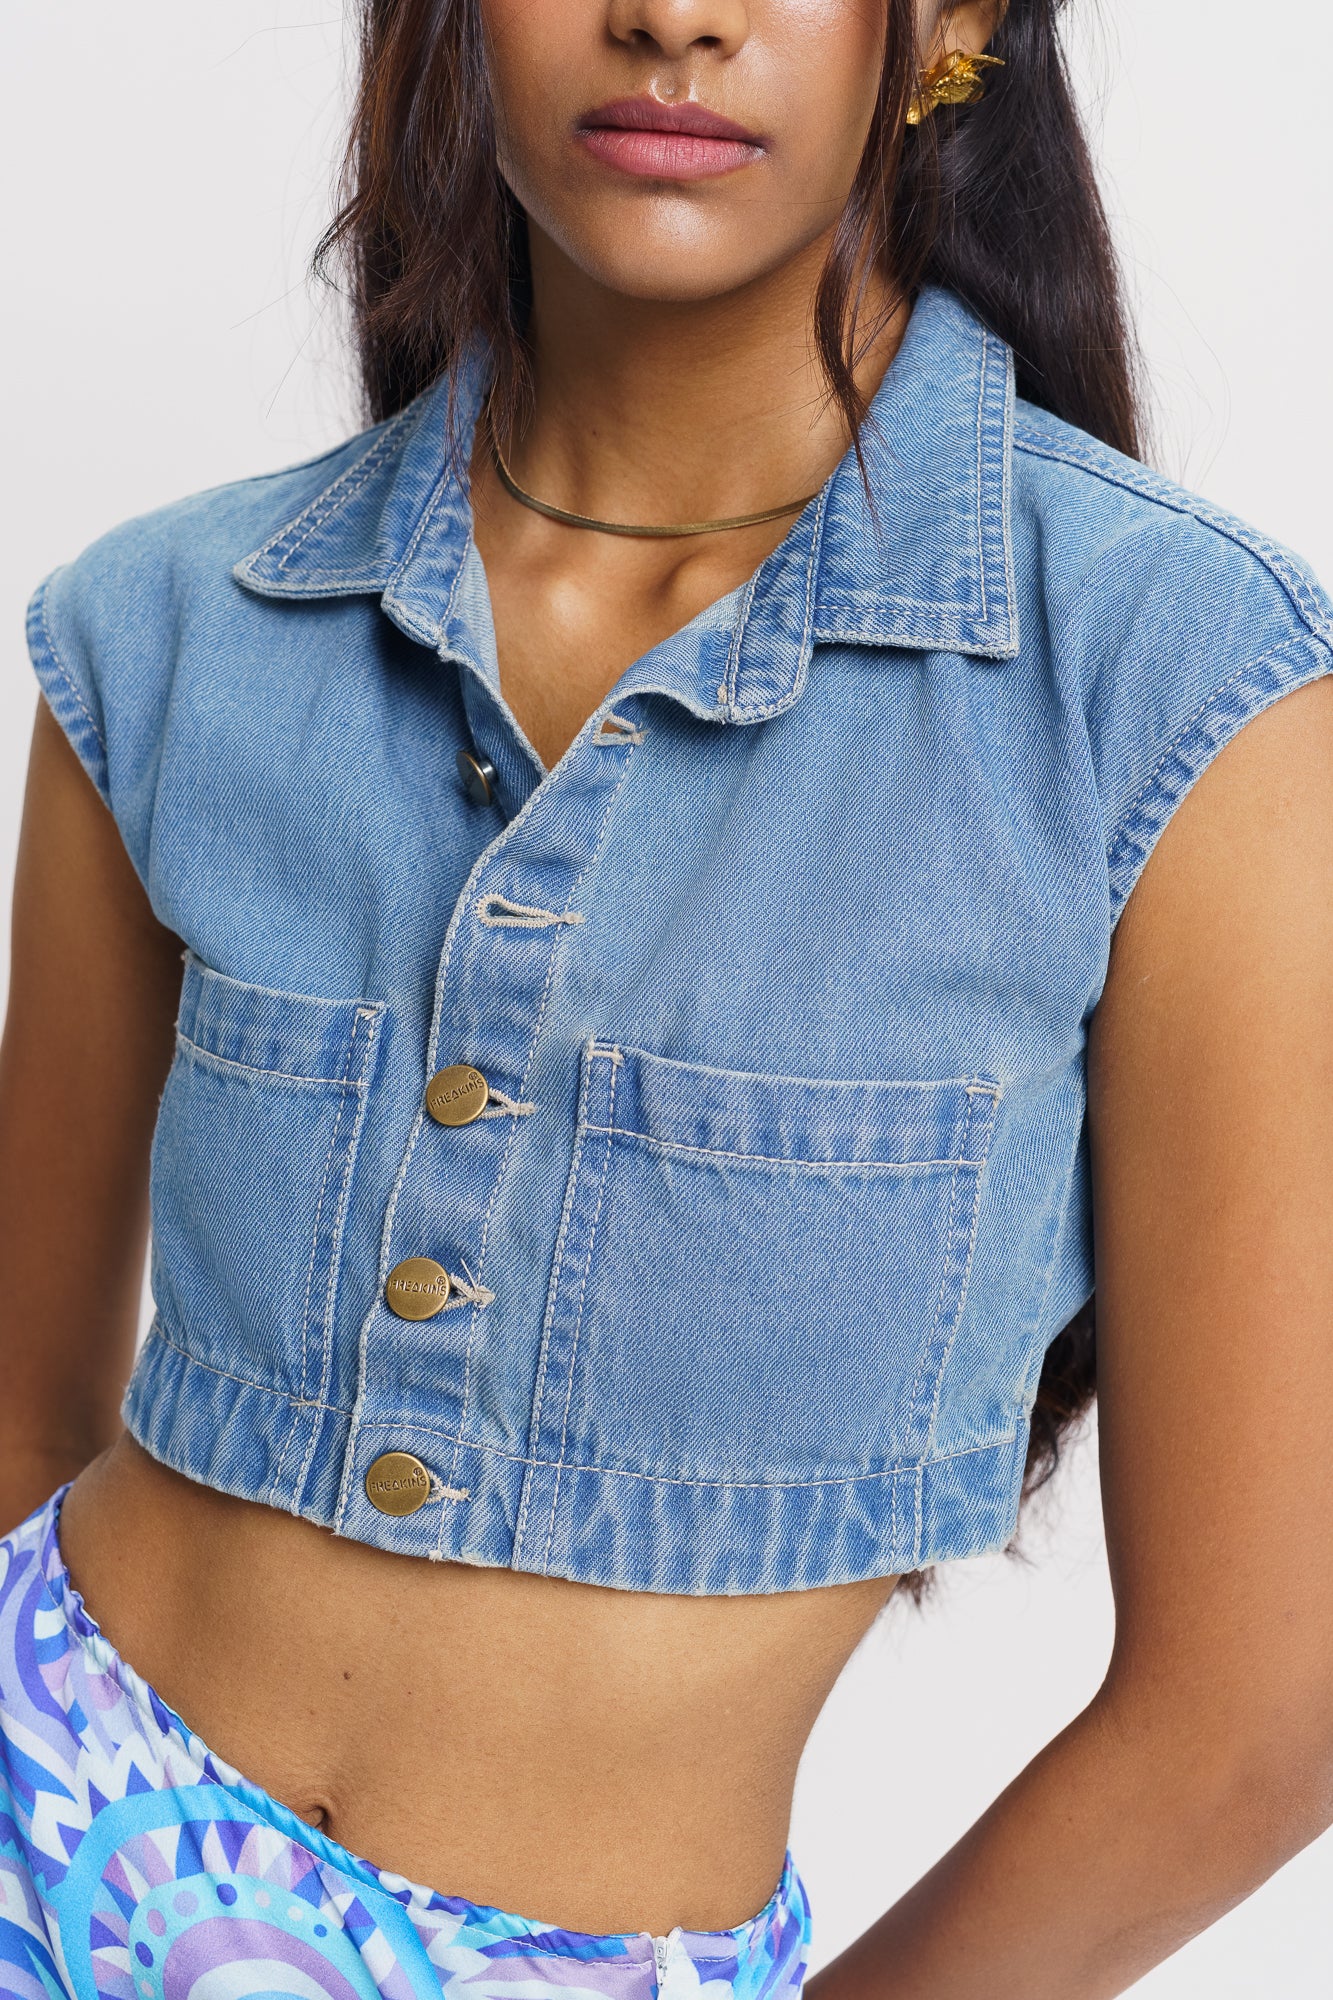 10 Outfit Ideas That Will Change the Way You Look at Jean Jackets